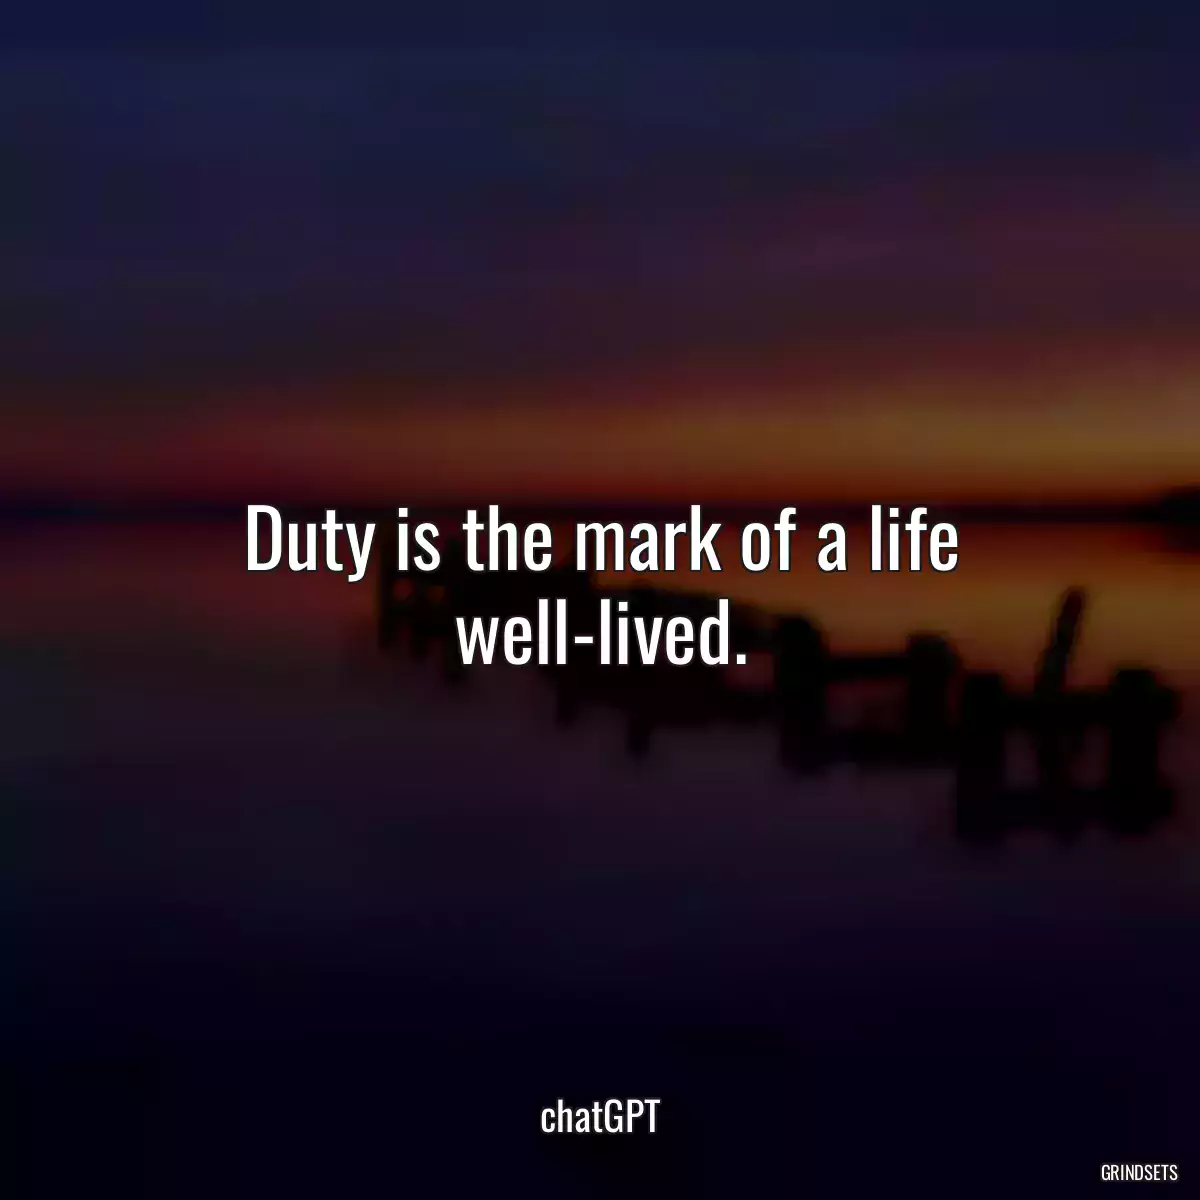 Duty is the mark of a life well-lived.